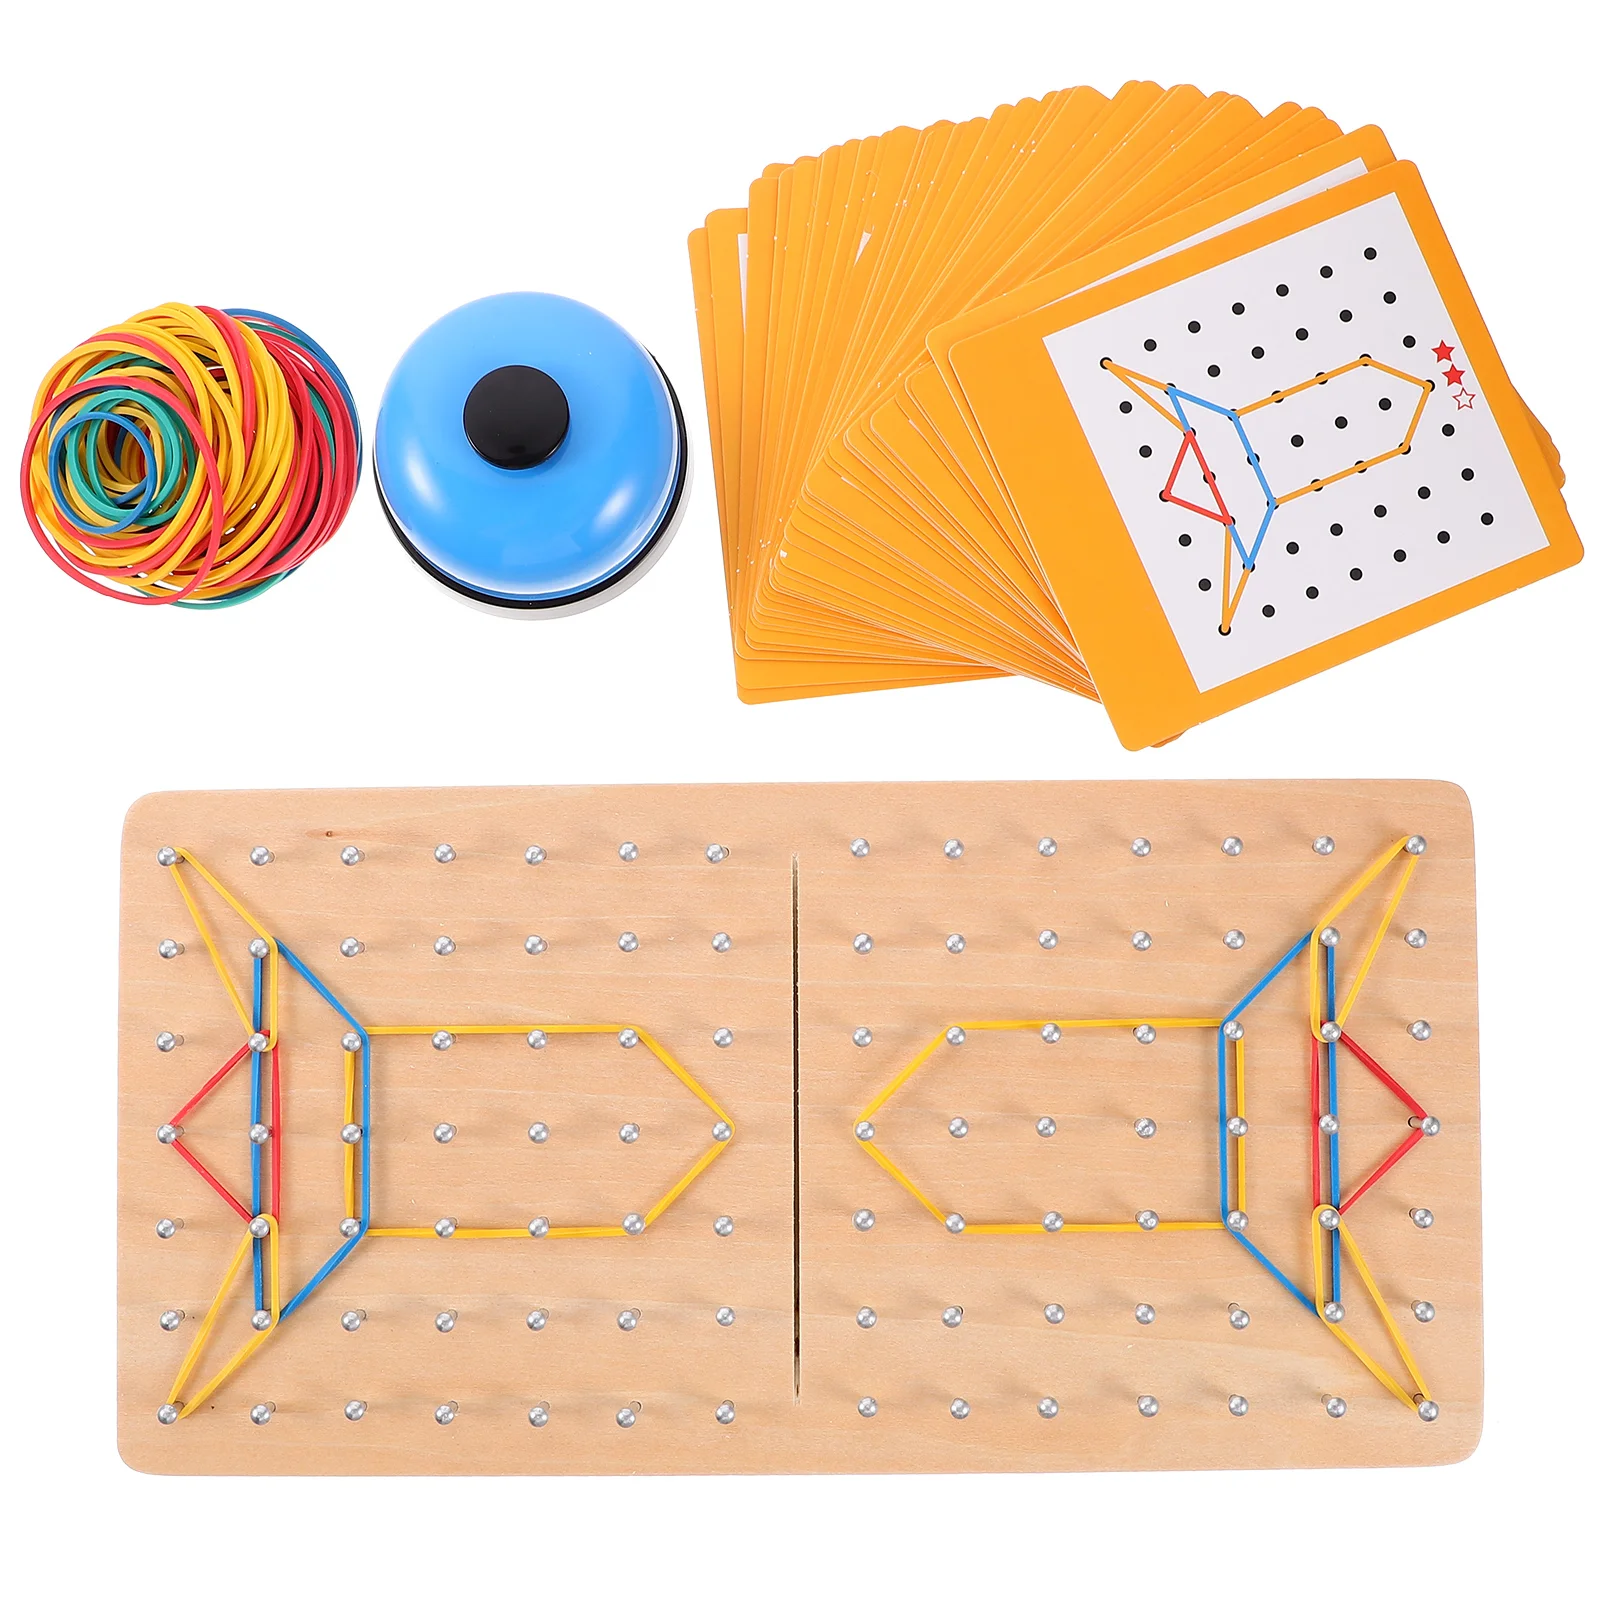 

Wooden Toys Kids Educational Prop Mathematical Rubber Band Geoboard Pegboard Geometric Shape Learning Tools Preschool